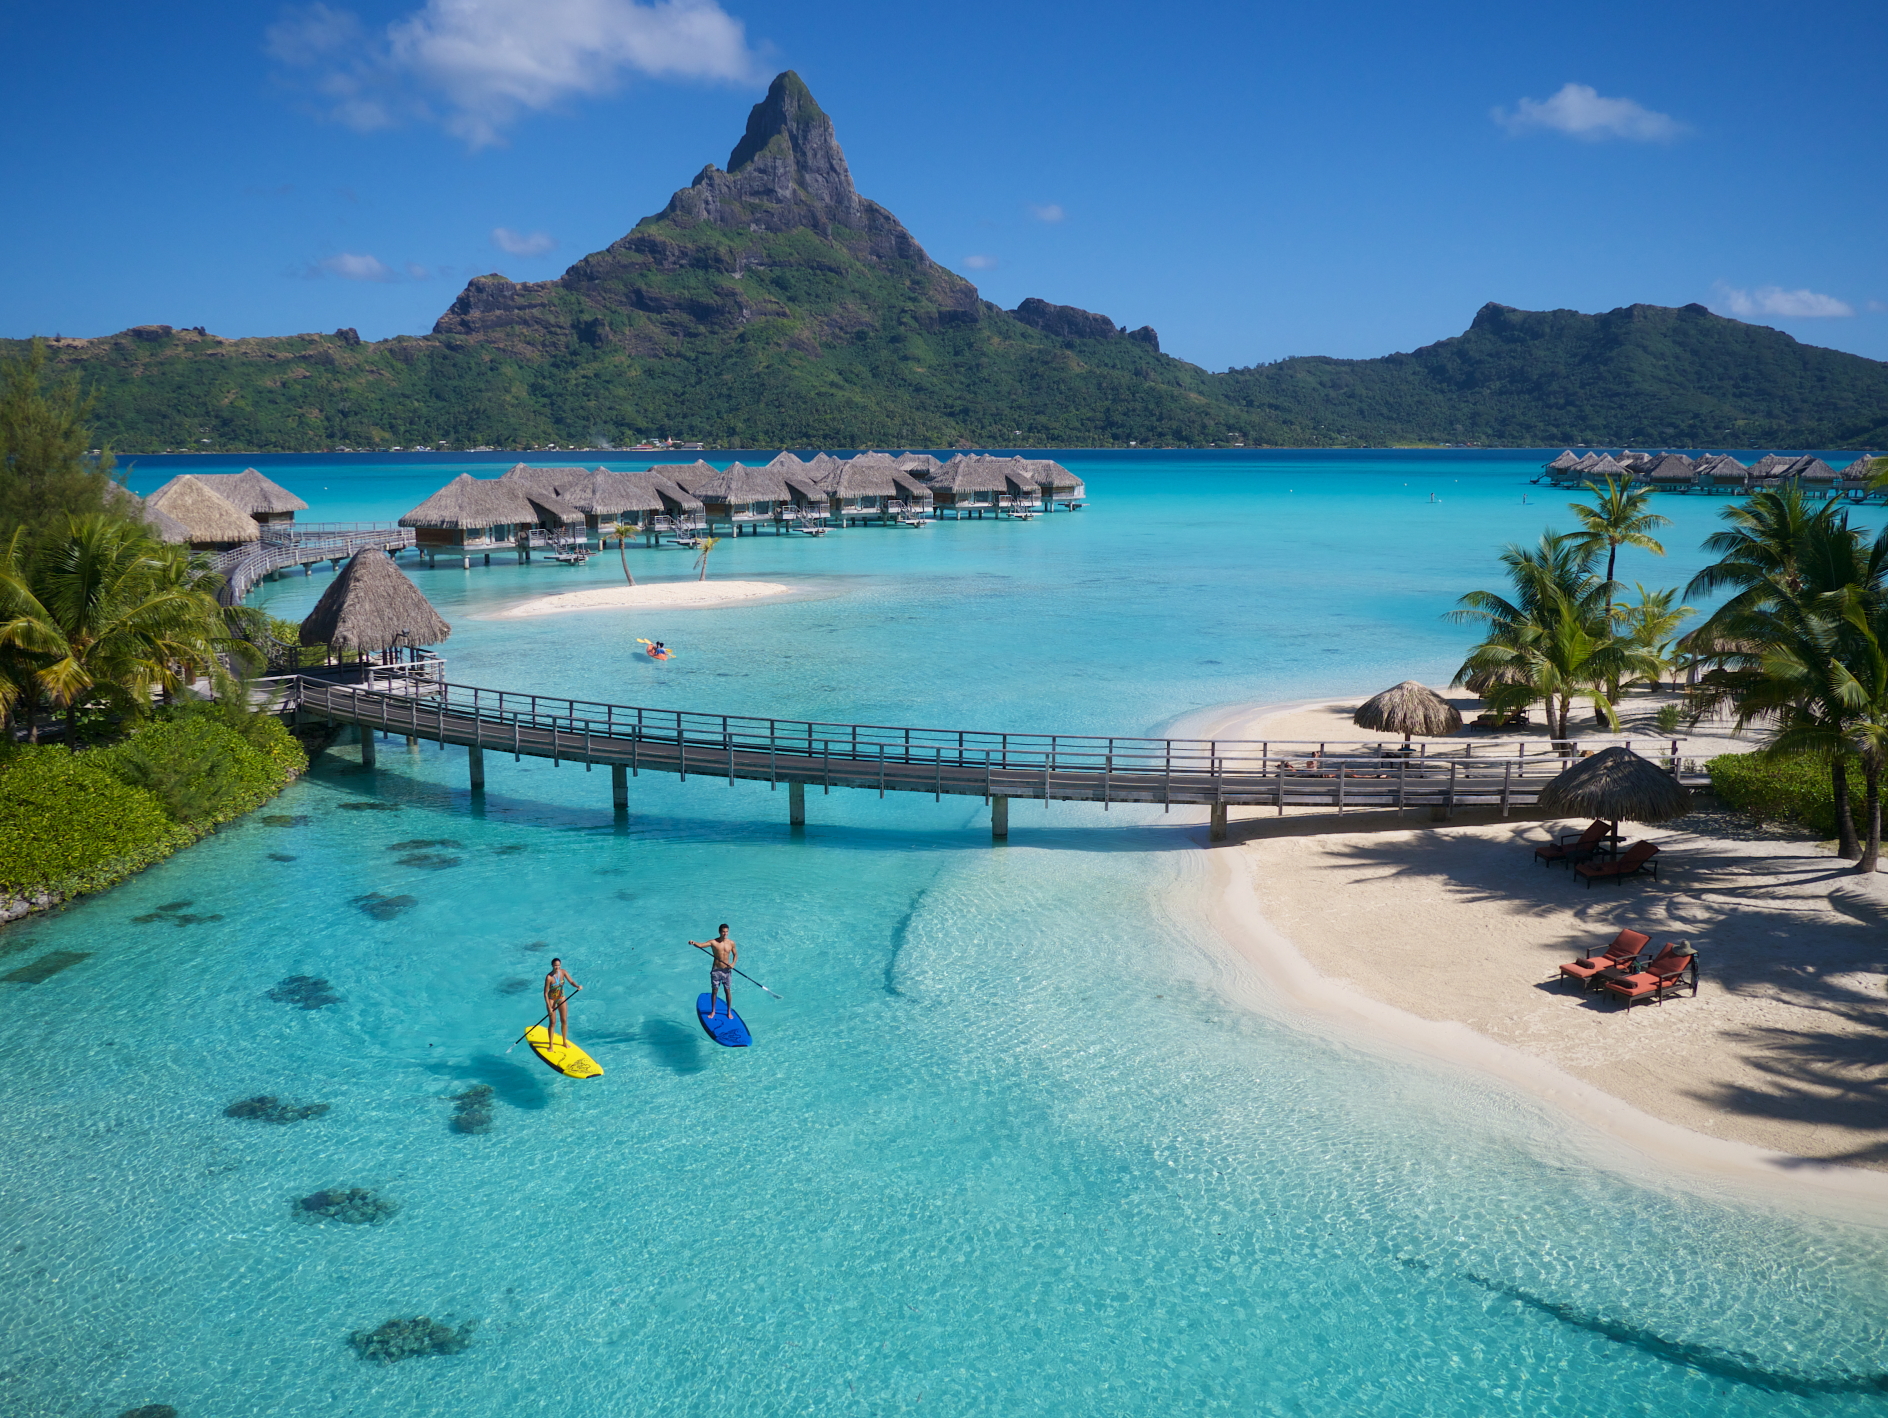 What some dreams are made of, the InterContinental Bora Bora Resort. Click to enlarge.